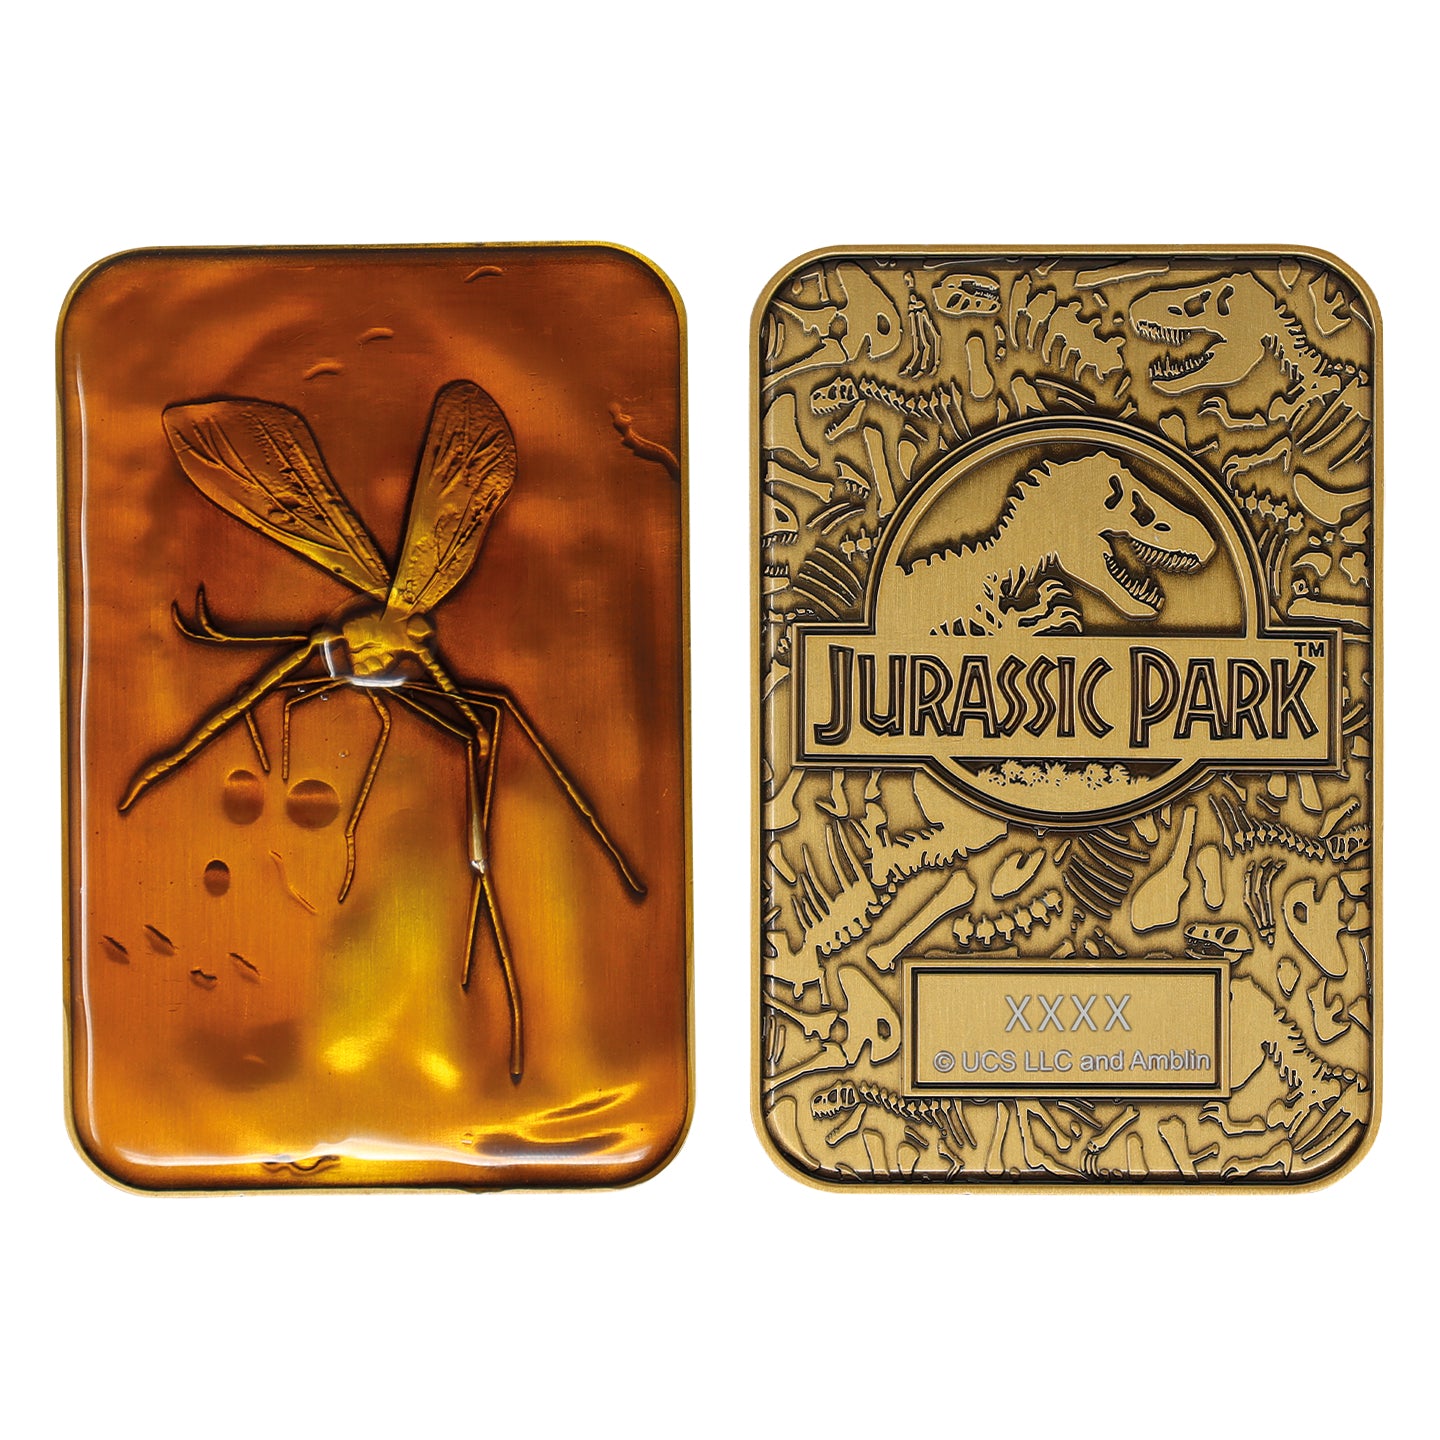 Jurassic Park Limited Edition Mosquito in Amber Ingot